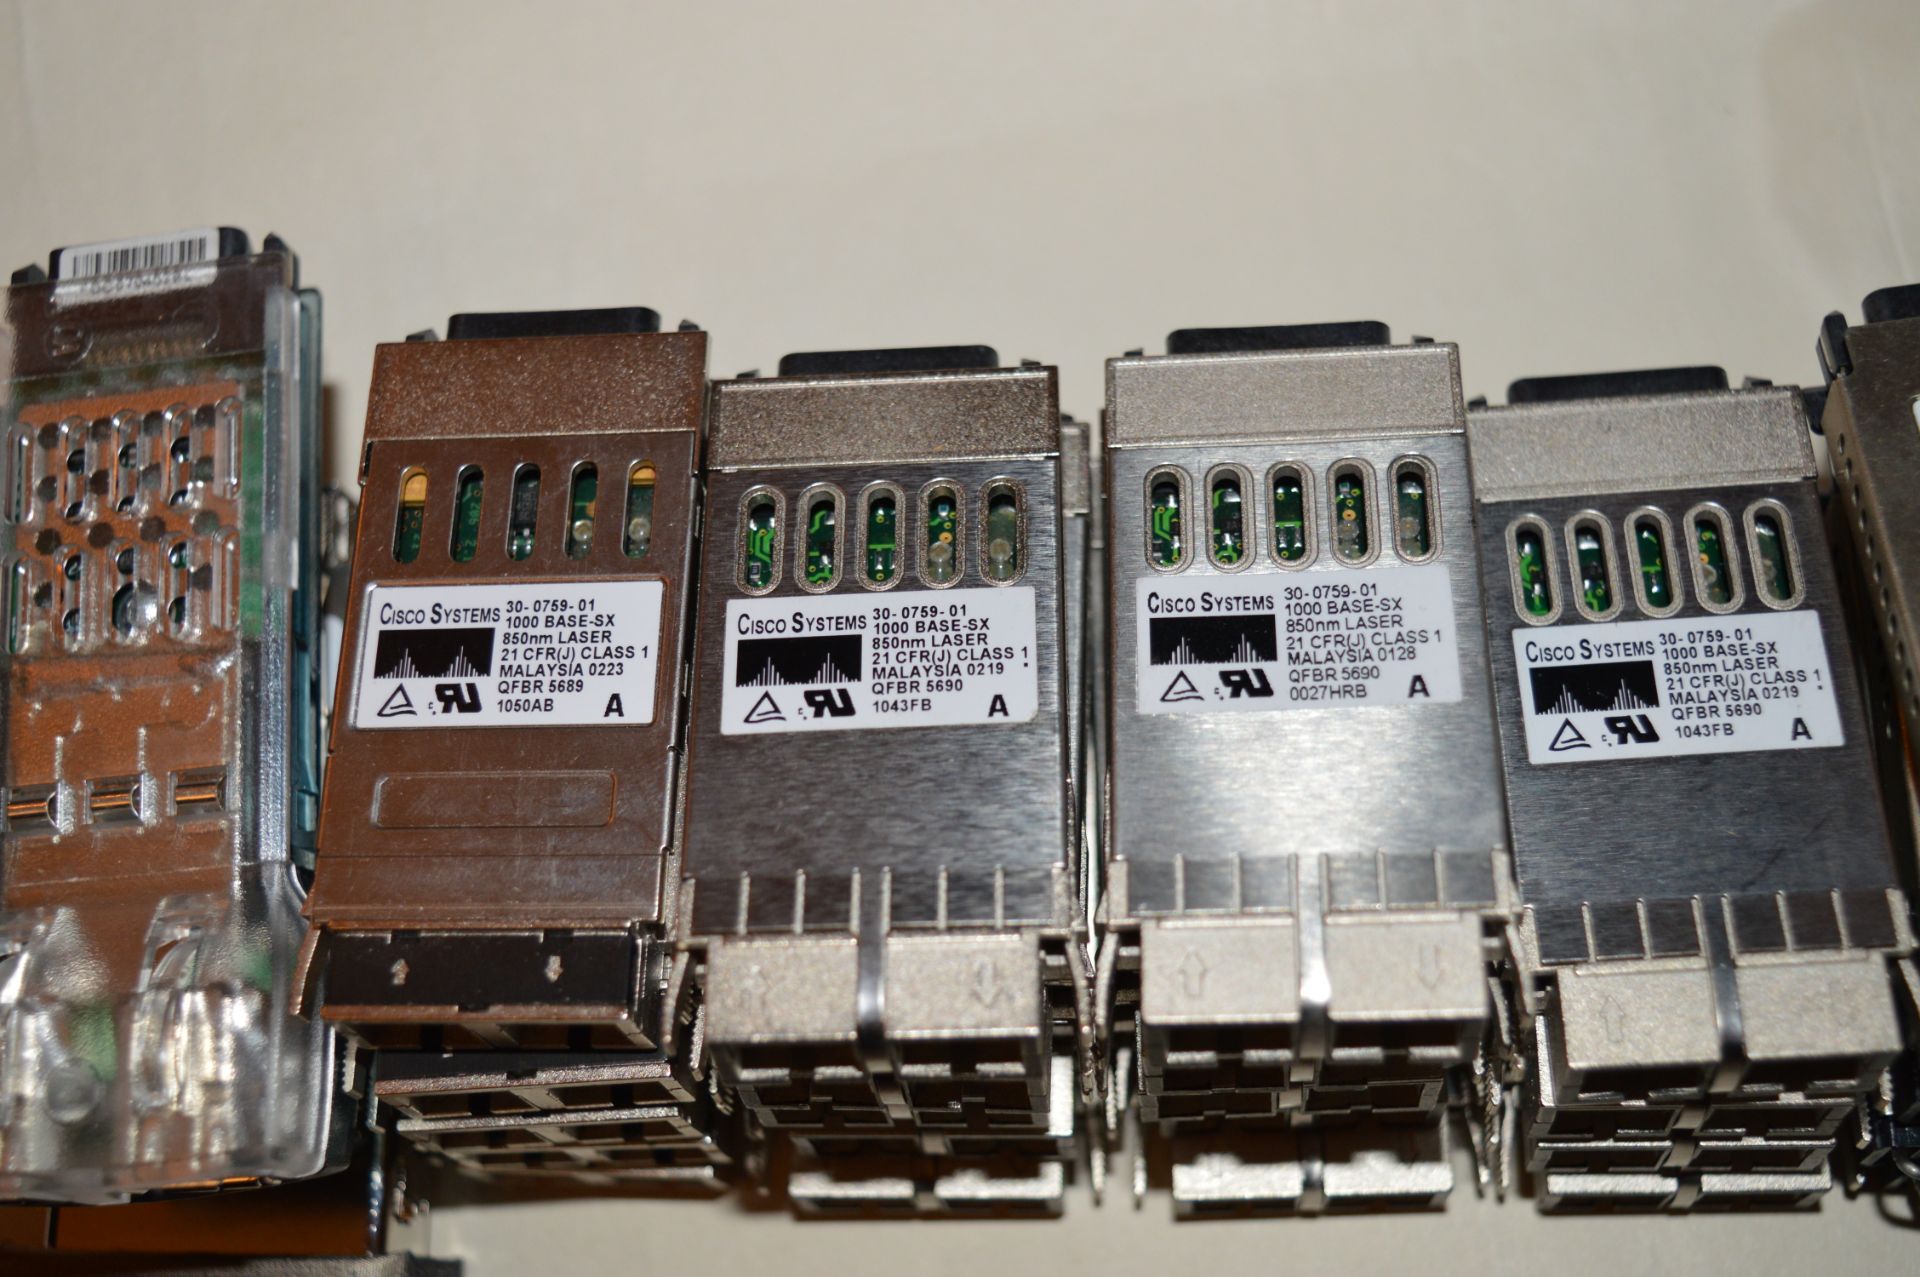 28 x Cisco Systems GBIC Transceivers - Mainly Type 30-0759-01 - Some Others Also Included - - Image 4 of 4